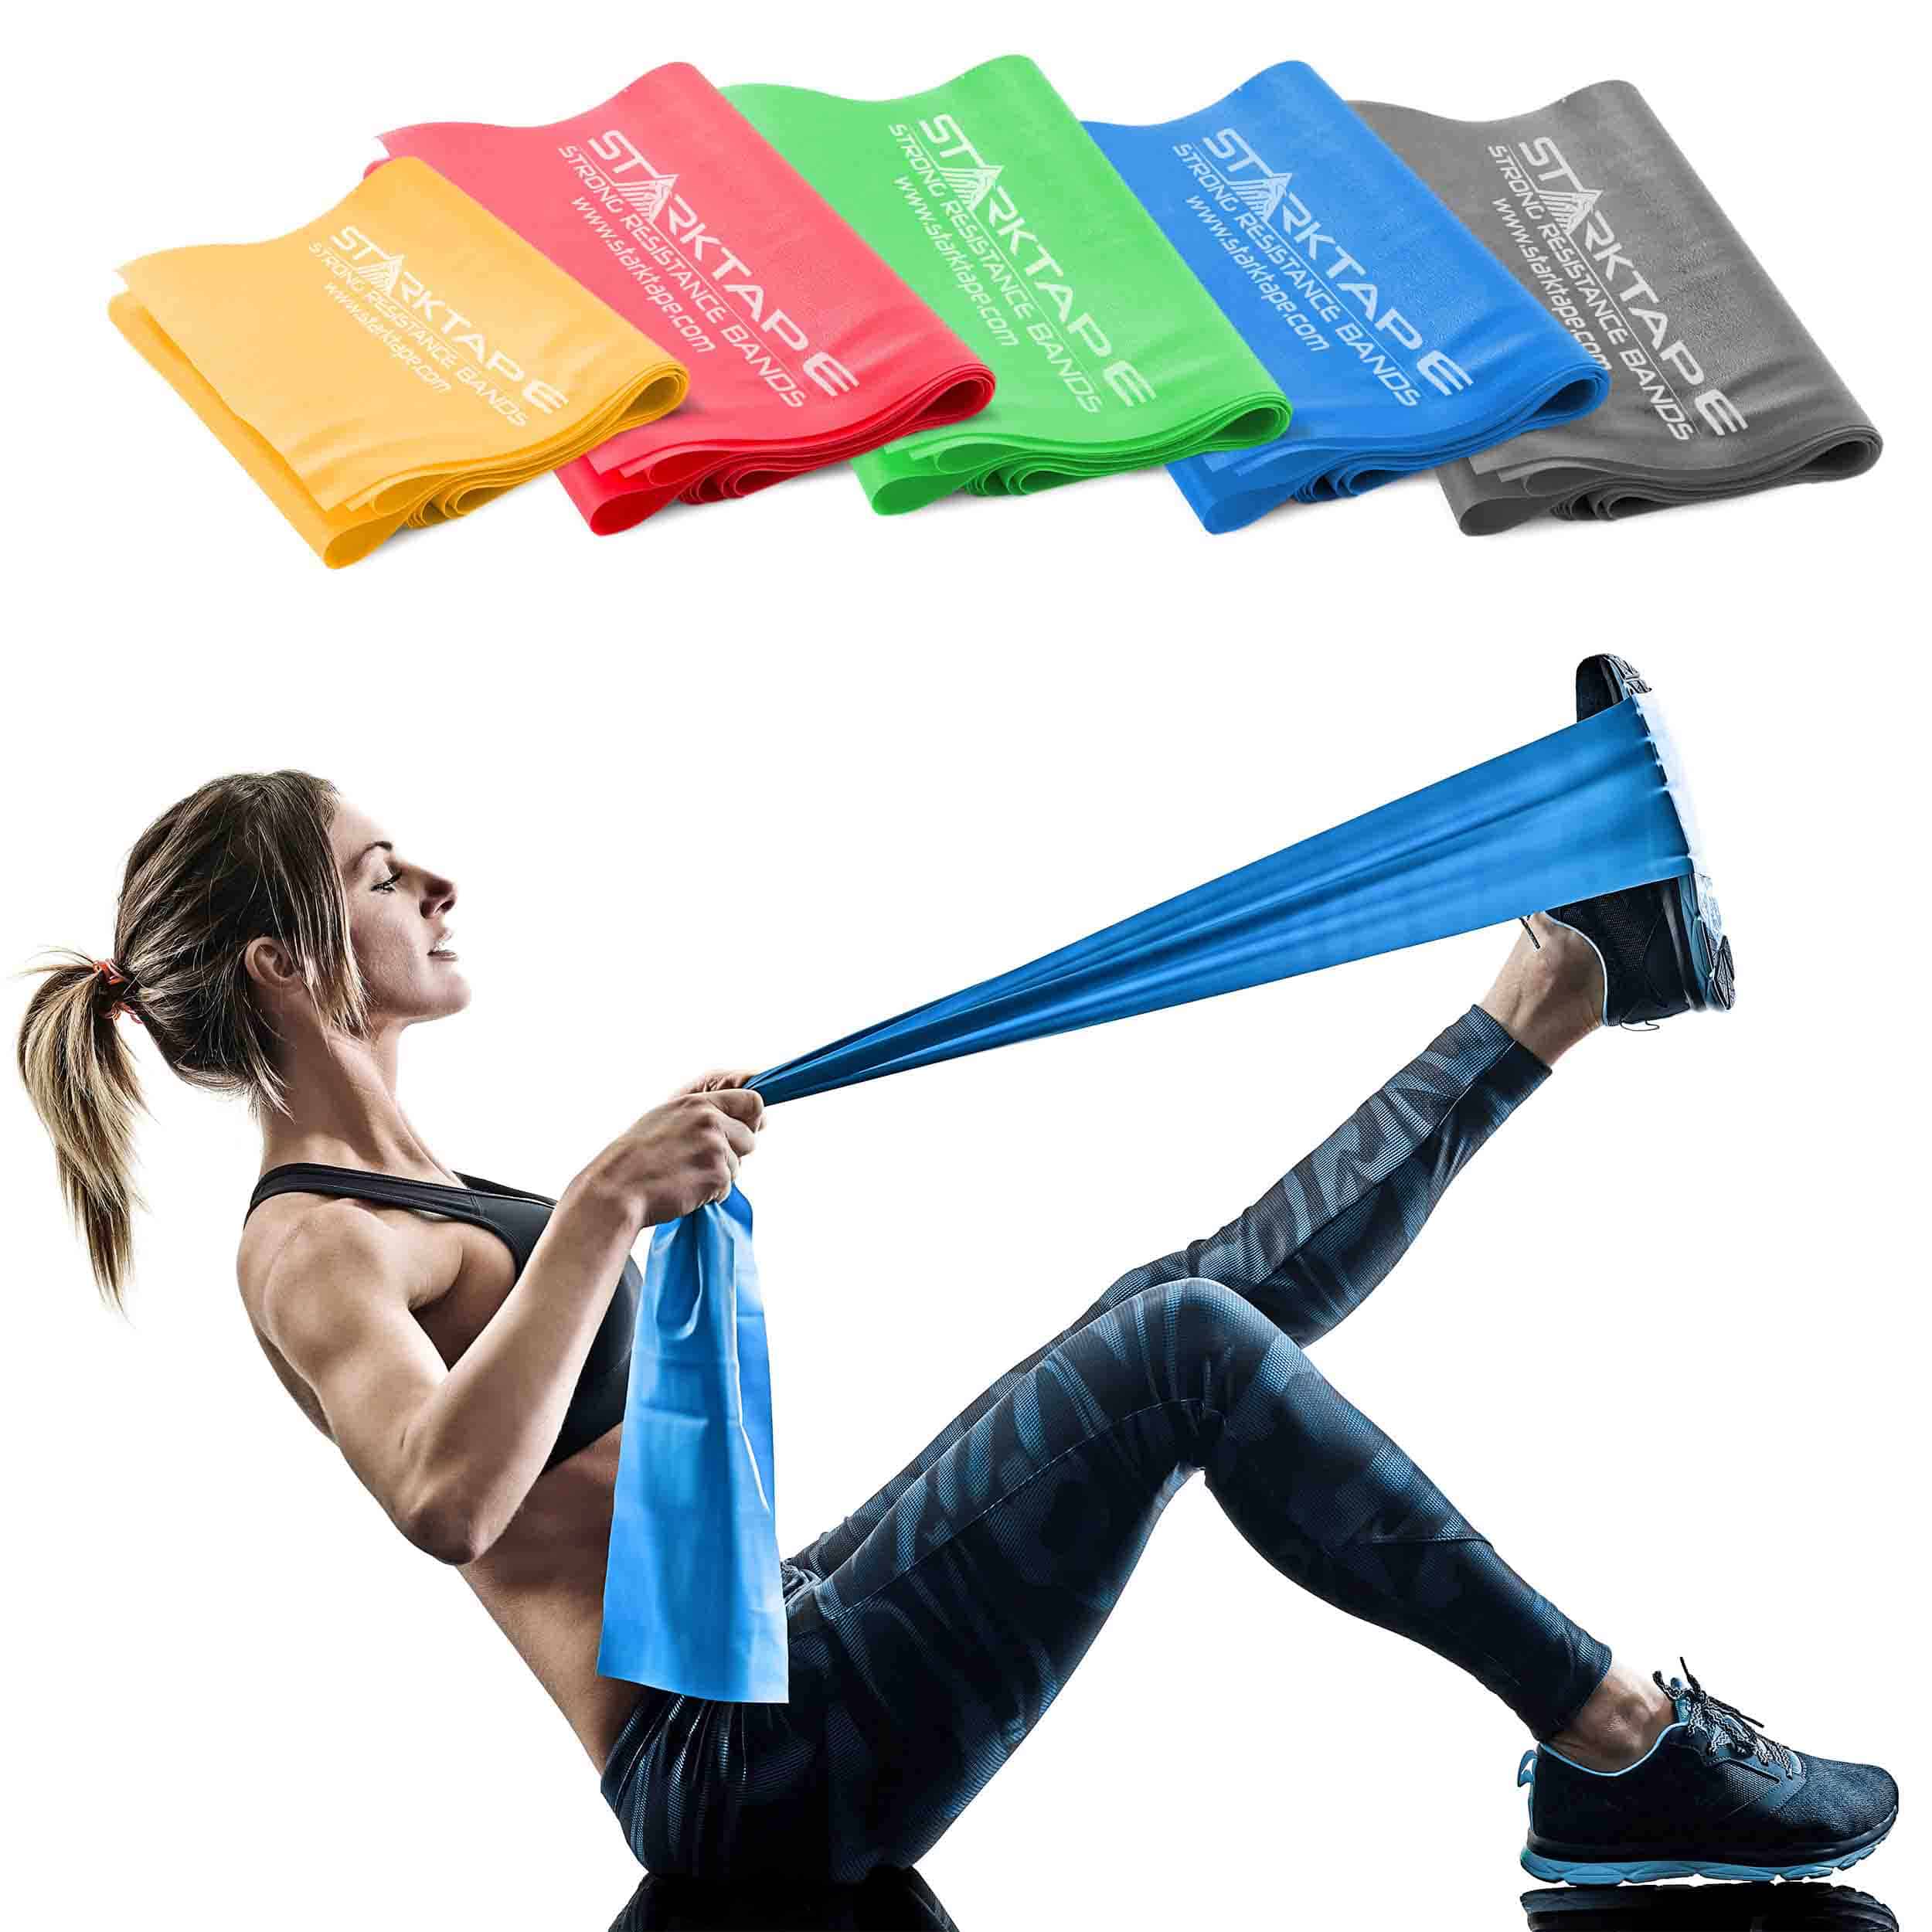 2x RESISTANCE BANDS SET OR SINGLES LATEX EXCERCISE GLUTES YOGA PILATE HOME GYM 